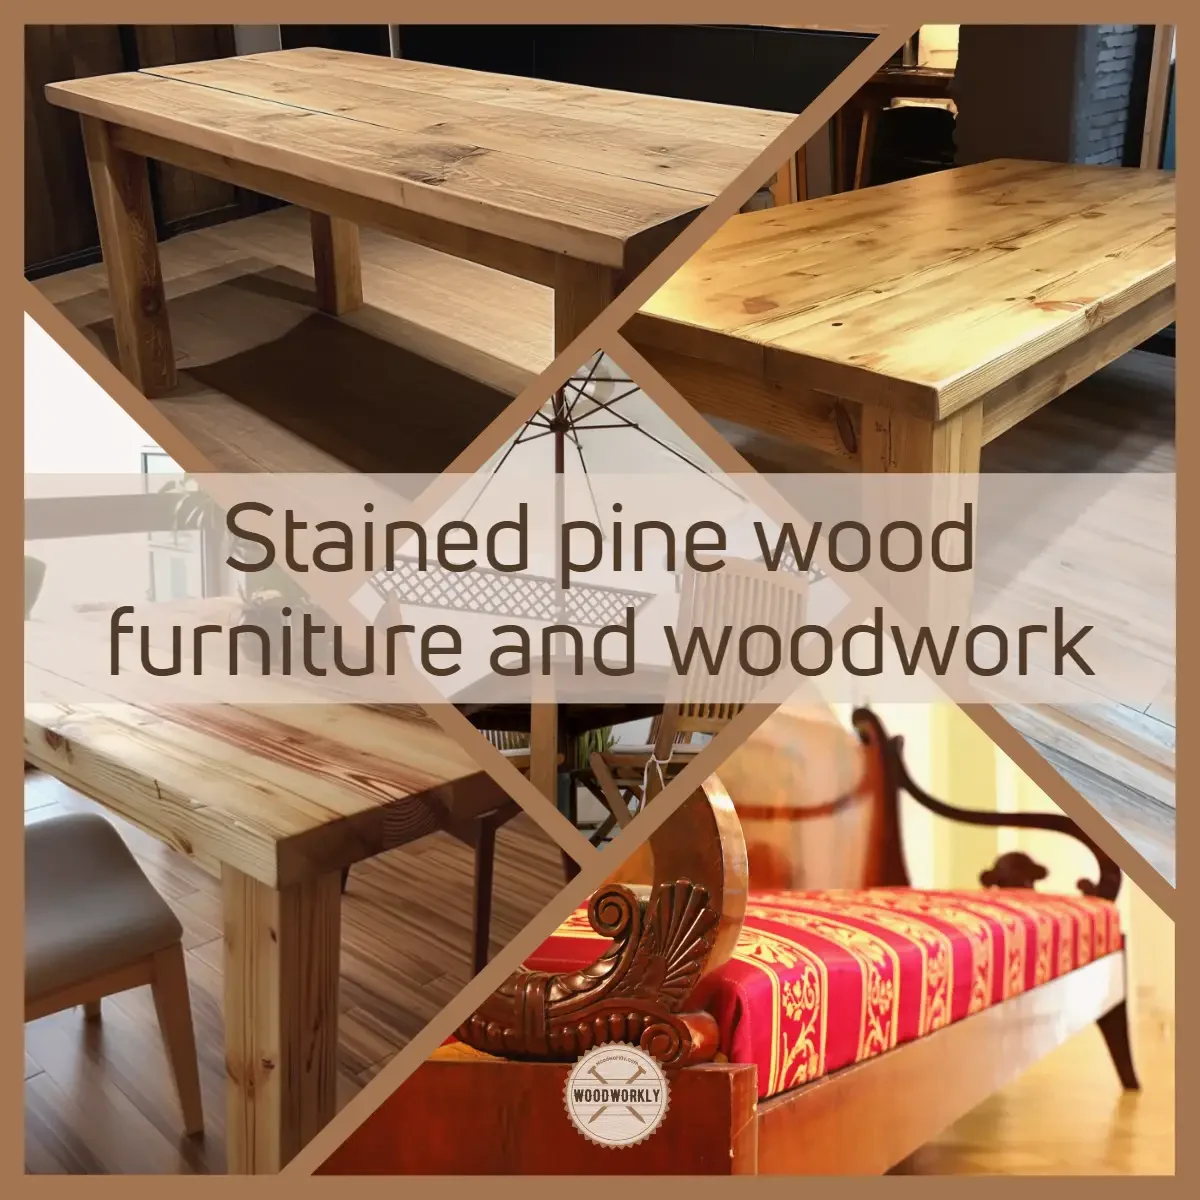 Stained pine wood furniture and woodwork